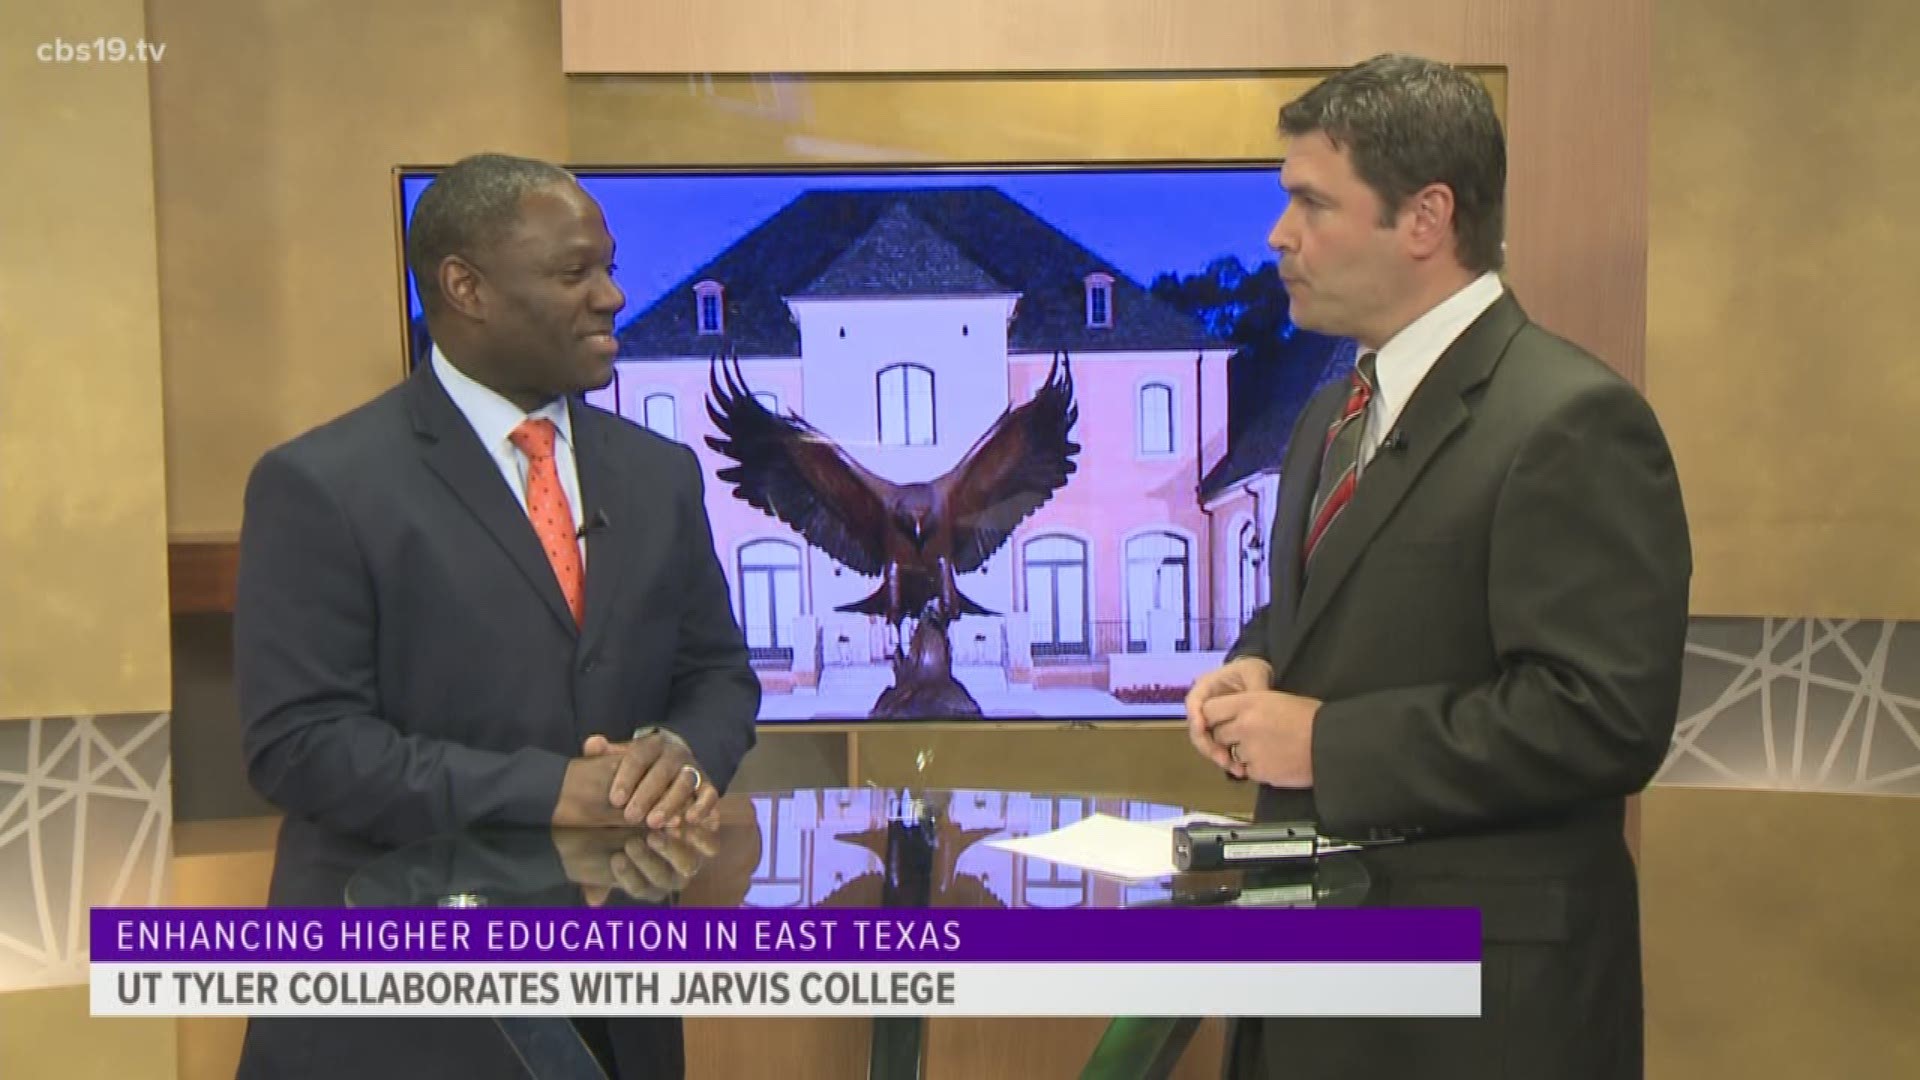 Bryan talks to UT Tyler President, Dr. Michael V. Tidwell about the Memorandum of Understanding with Jarvis Christian College to improve degree pathways for students.